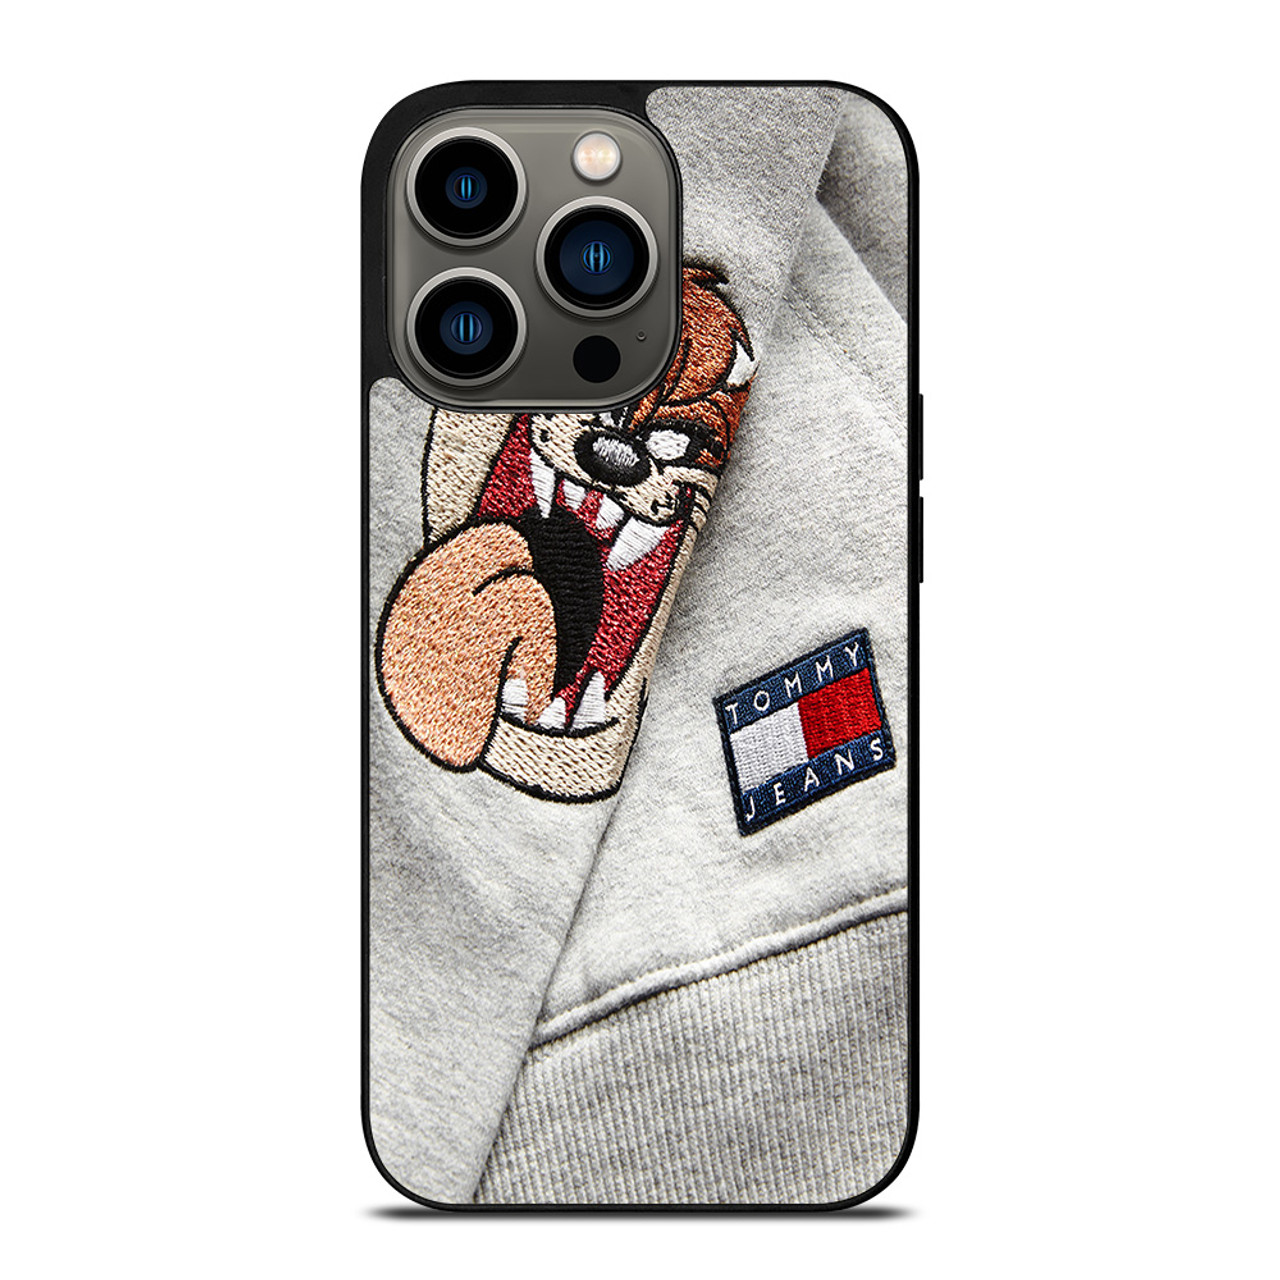 duizend betrouwbaarheid Offer TOMMY HILFIGER TAZMANIA iPhone 13 Pro Case Cover